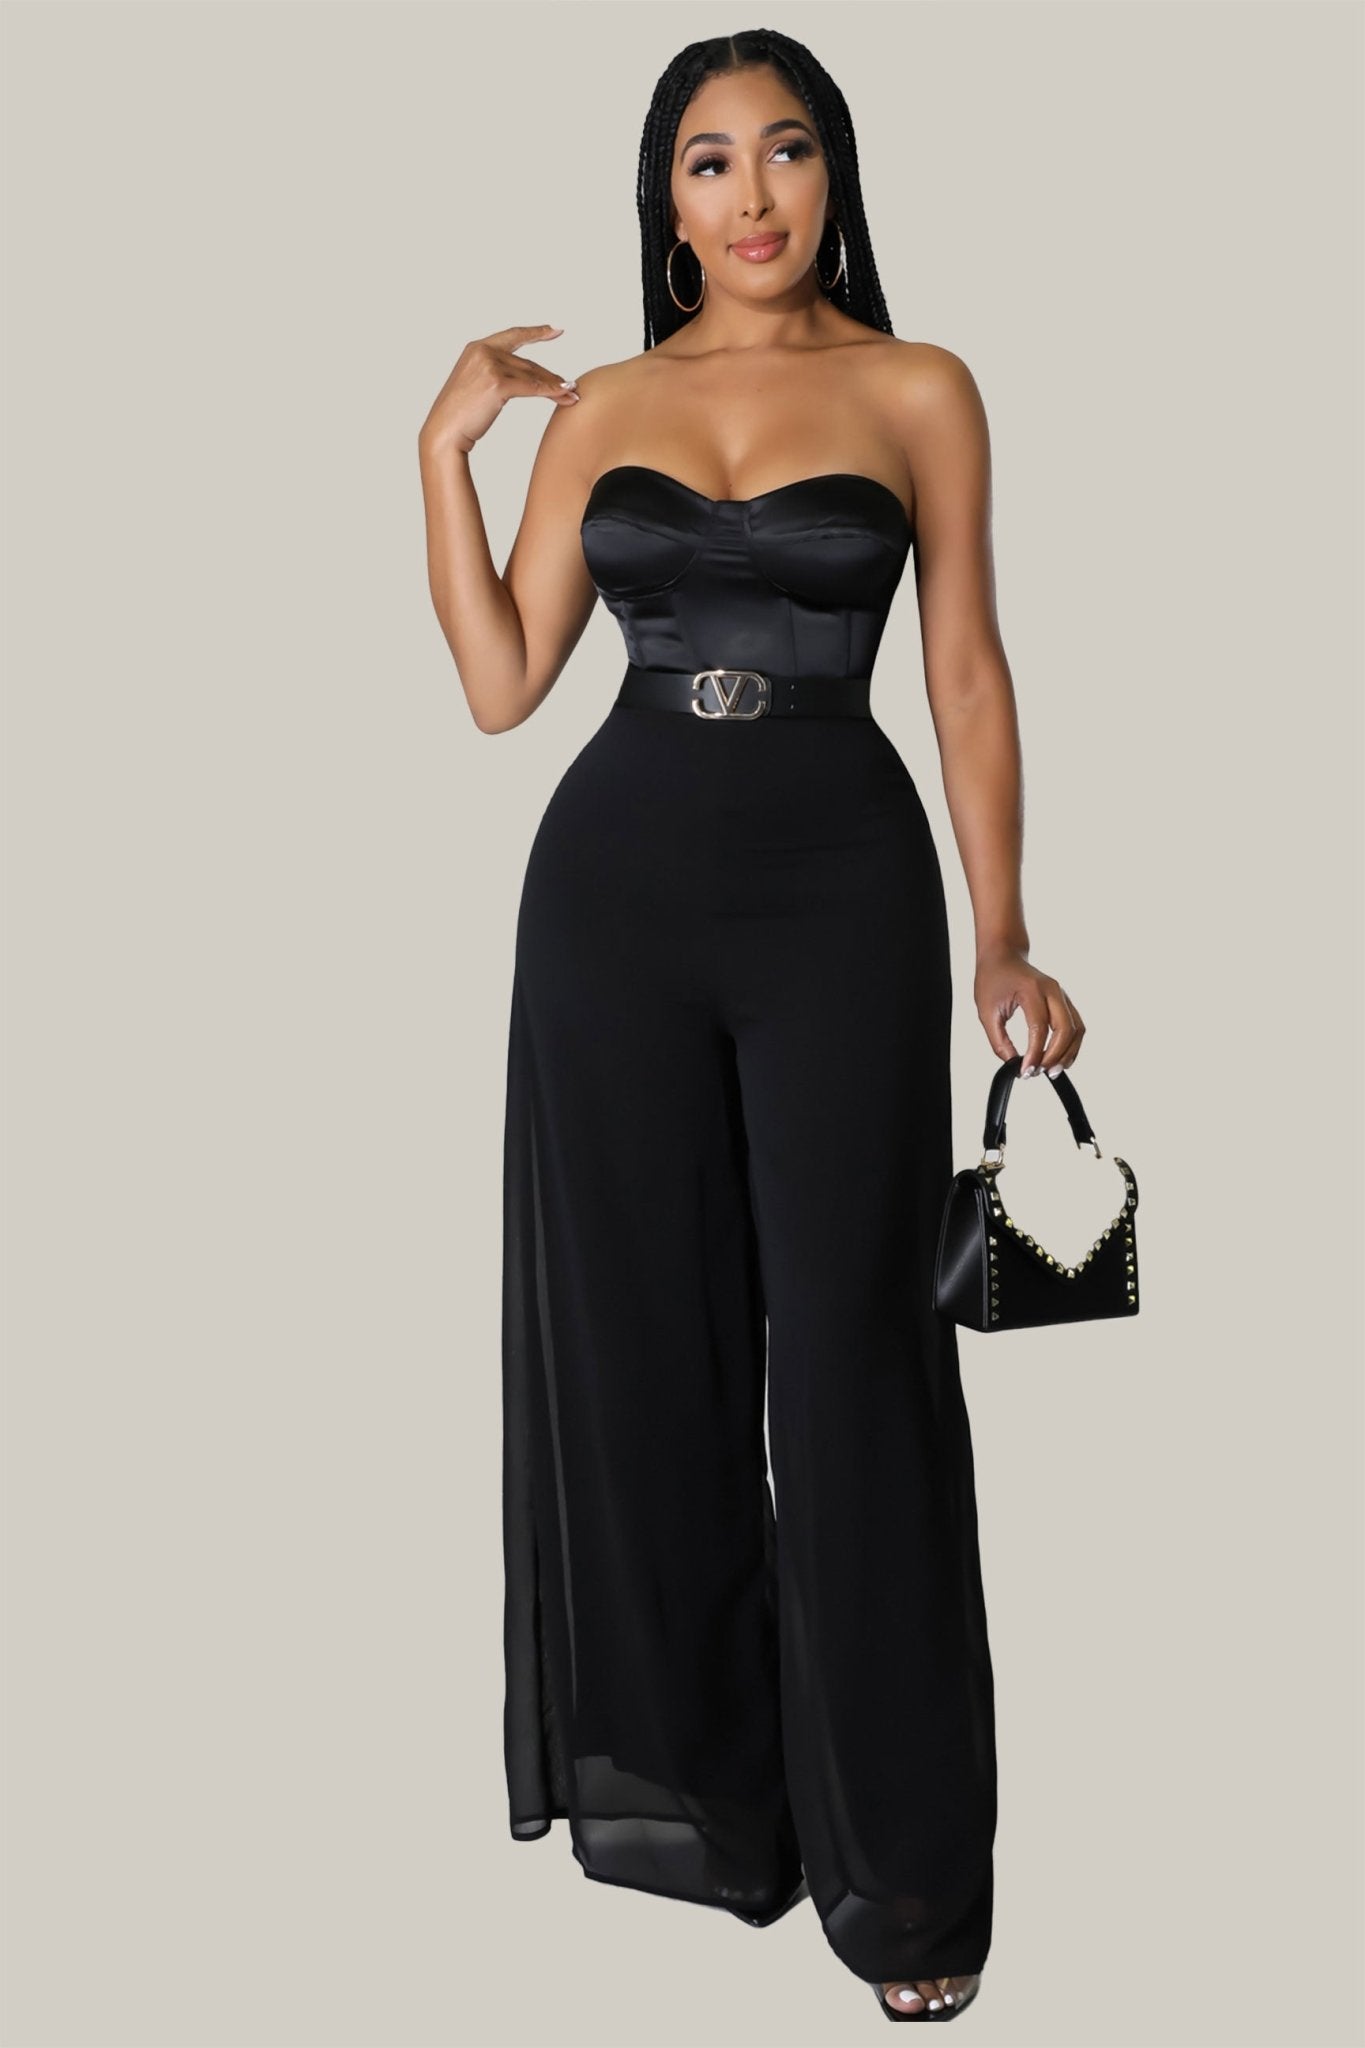 VIOLET CORSET JUMPSUIT - MY SEXY STYLES